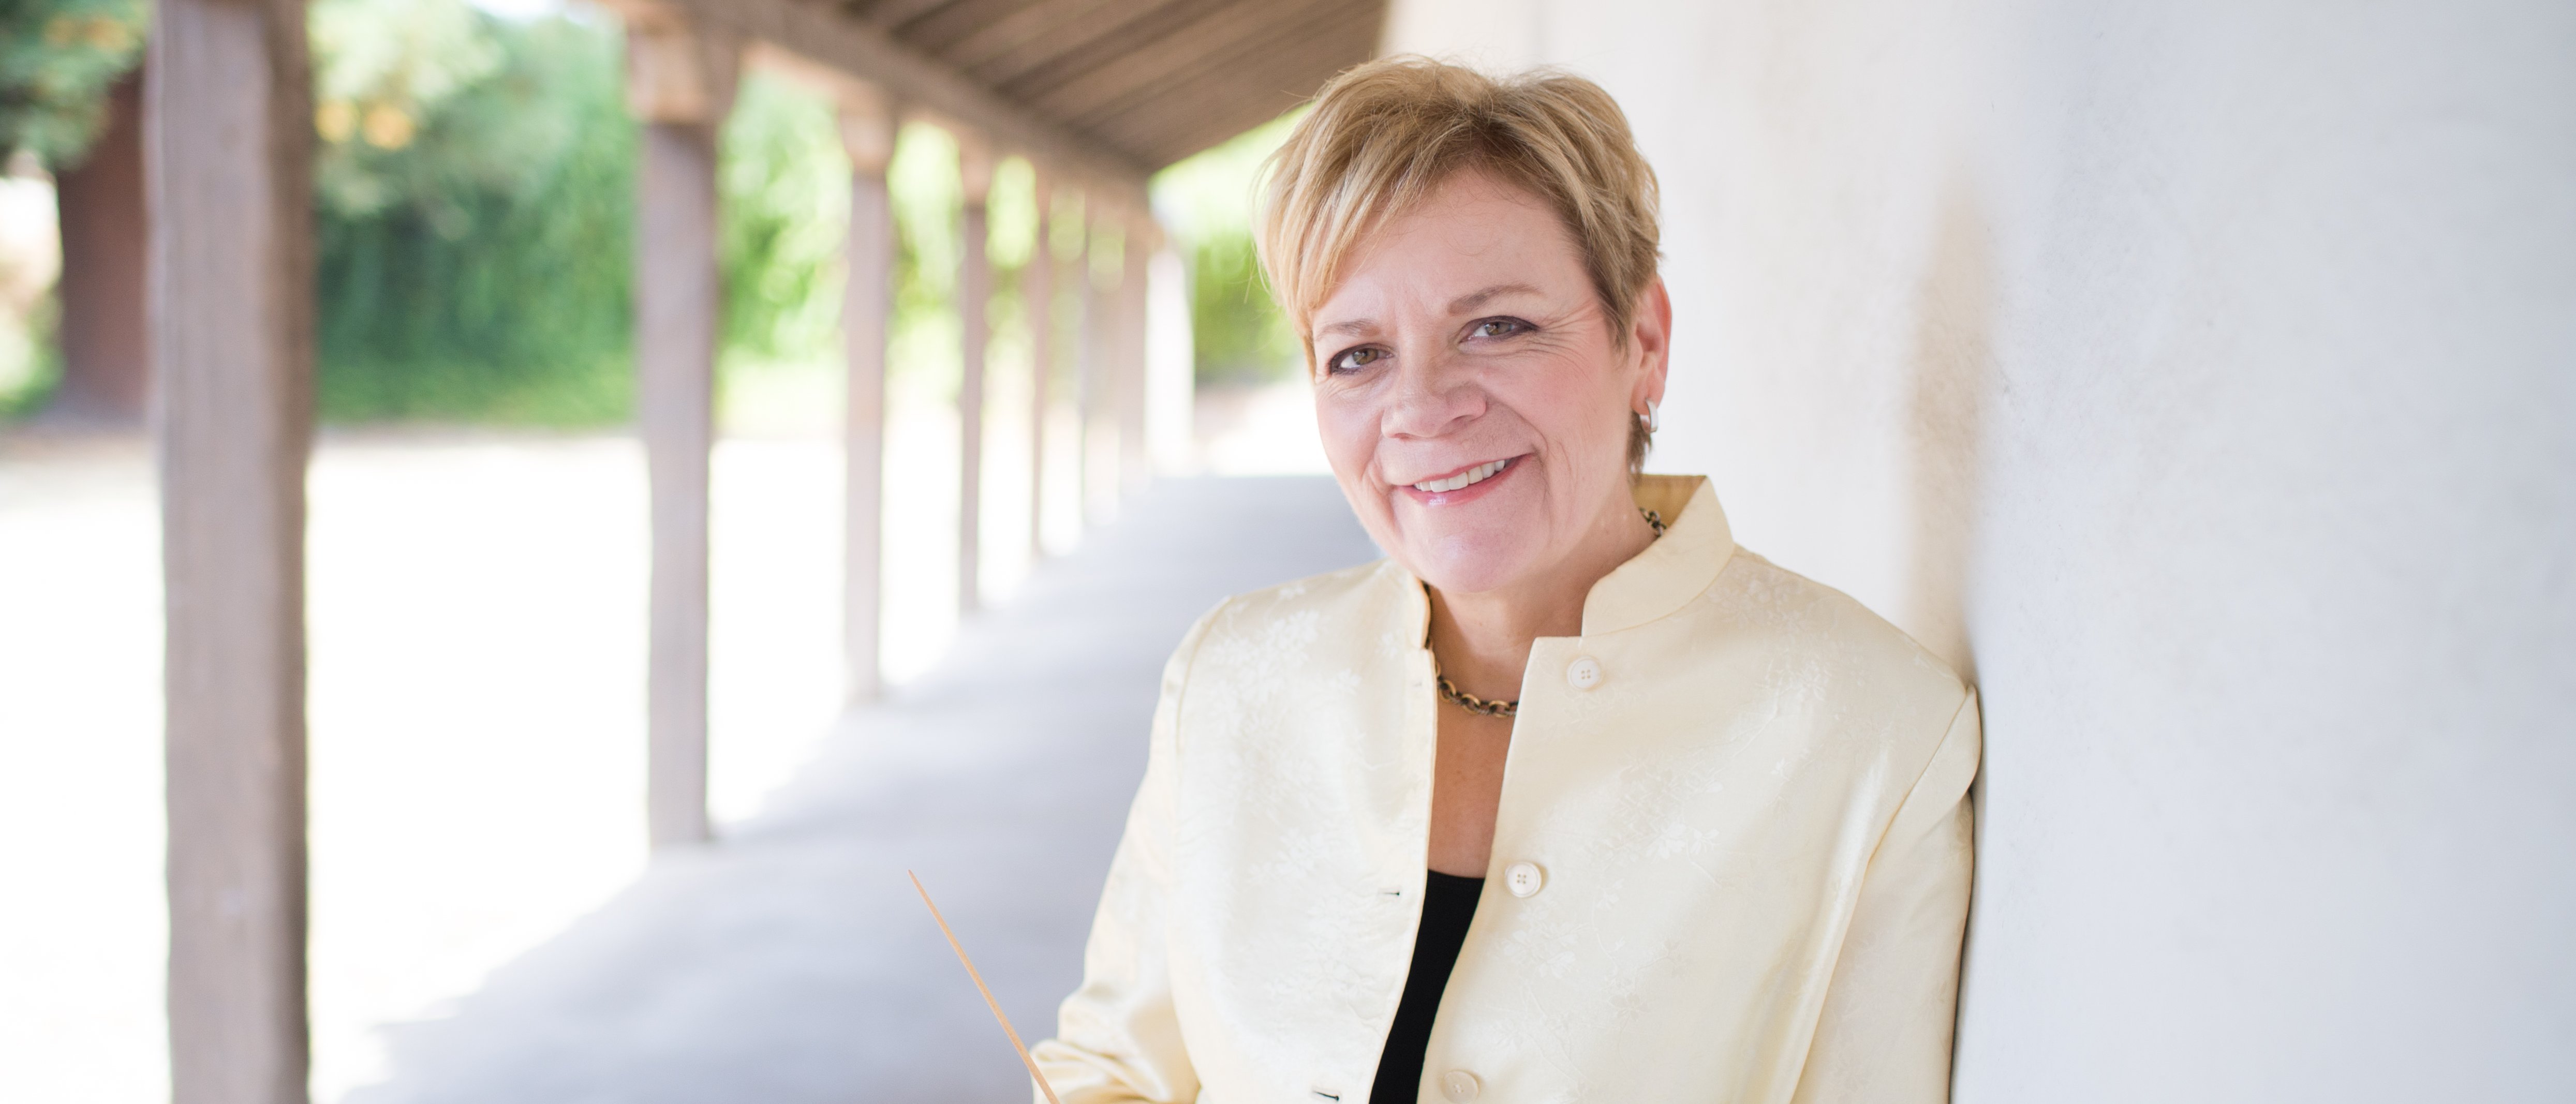 Marin Alsop leaning against a wall